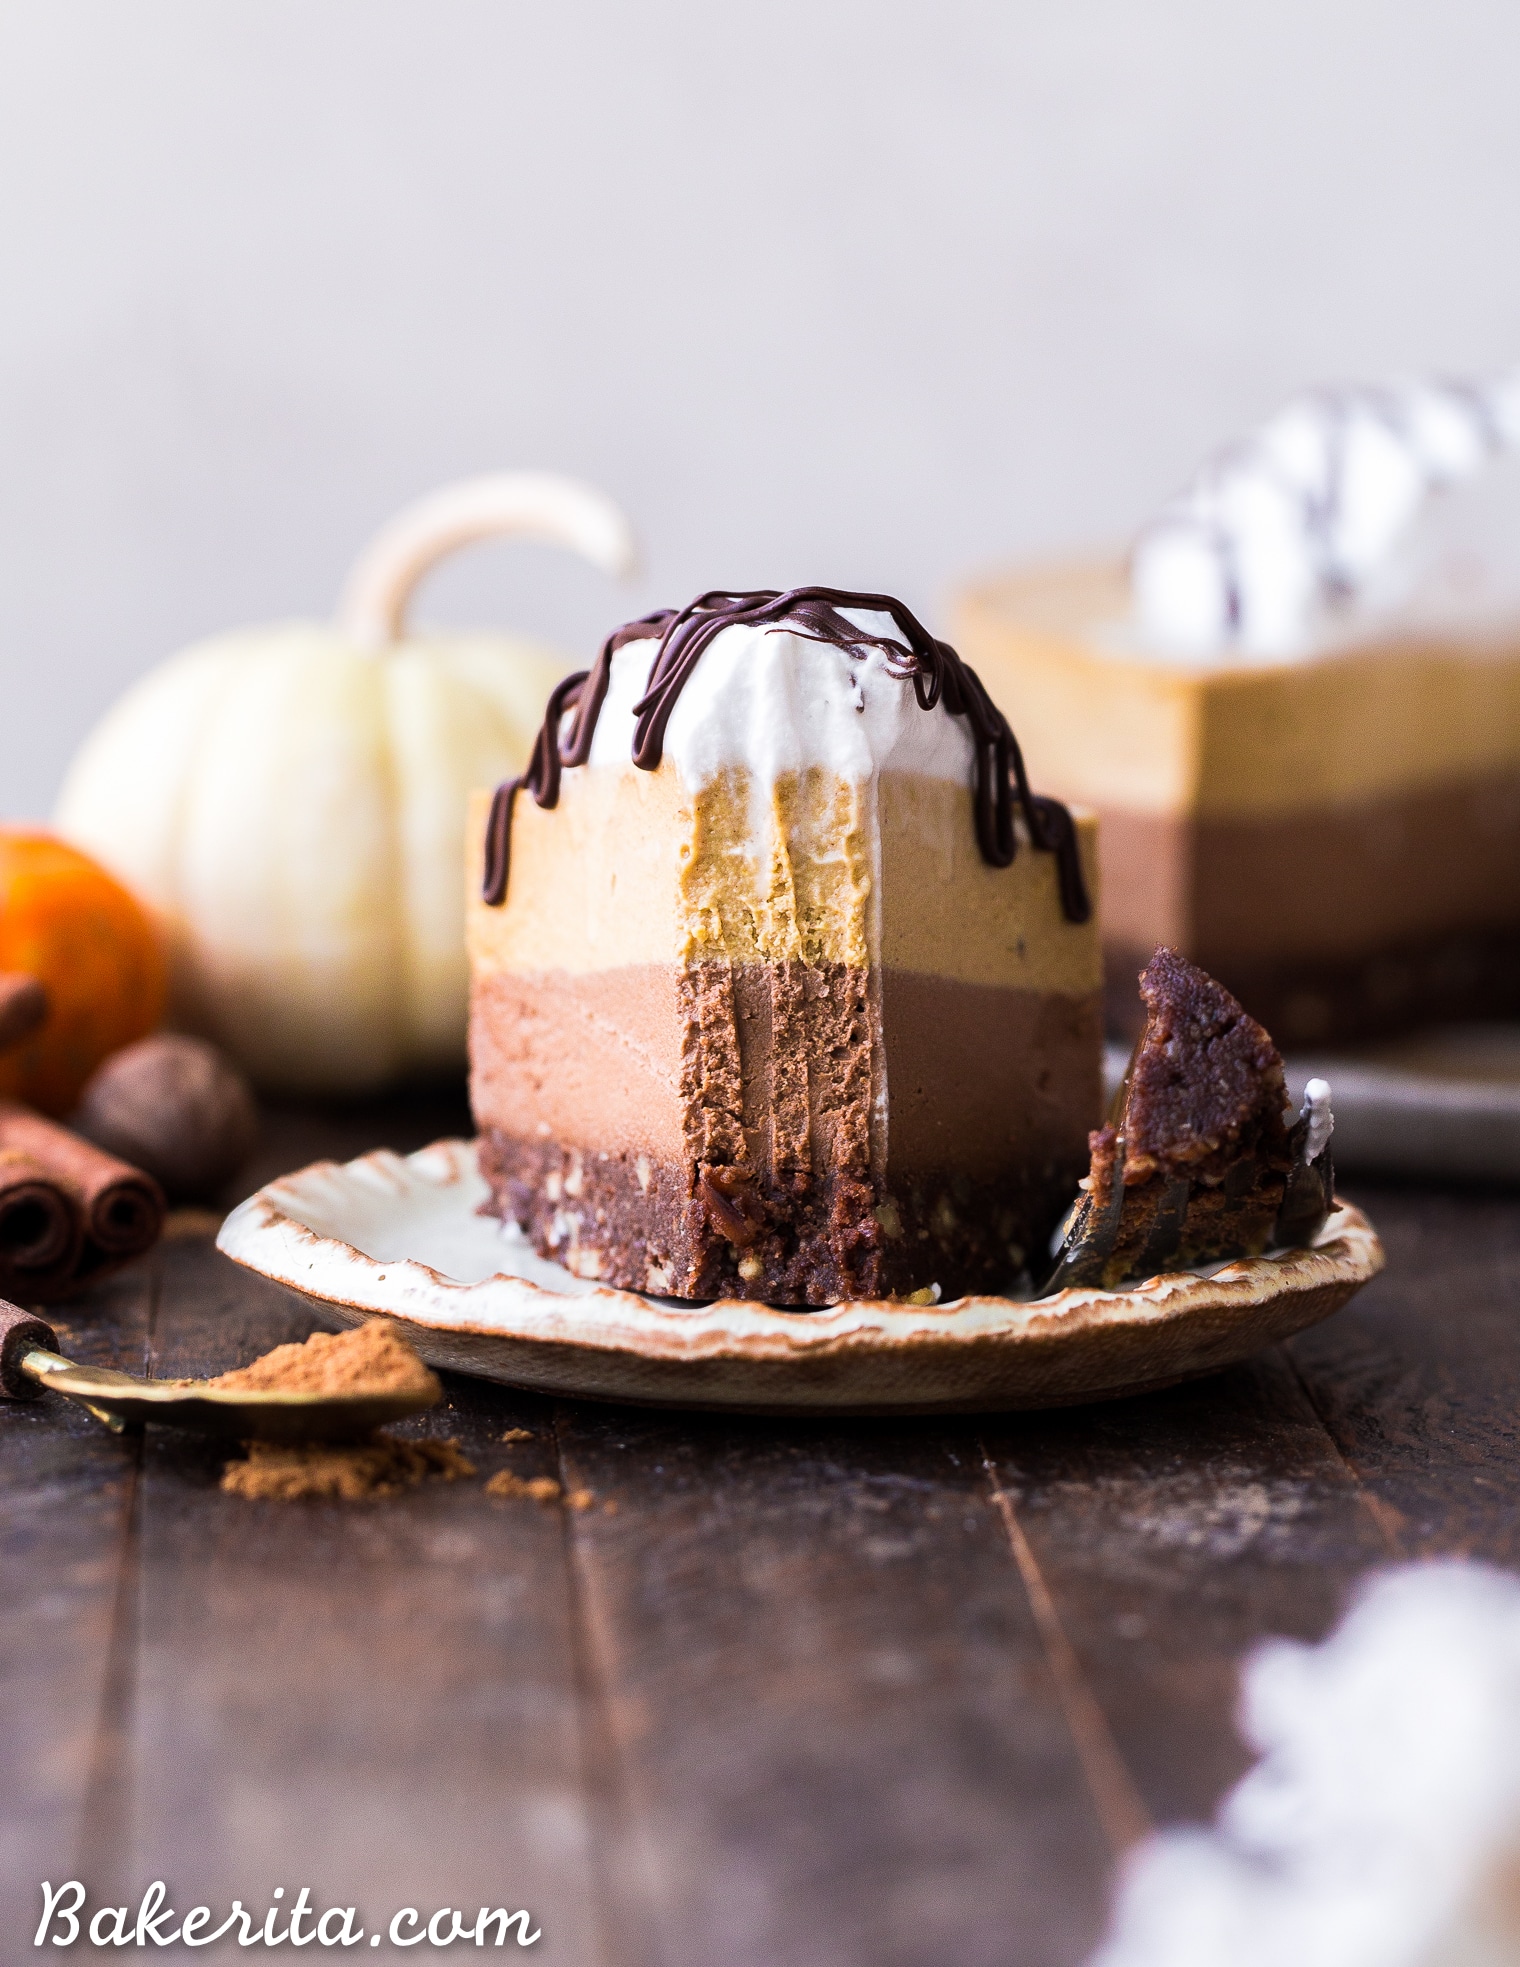 This No-Bake Vegan Chocolate Pumpkin Cheesecake has layers of chocolate and pumpkin spice cashew-based cheesecake, on top of a chocolate date crust. This make-ahead raw dessert is perfect for the holidays.